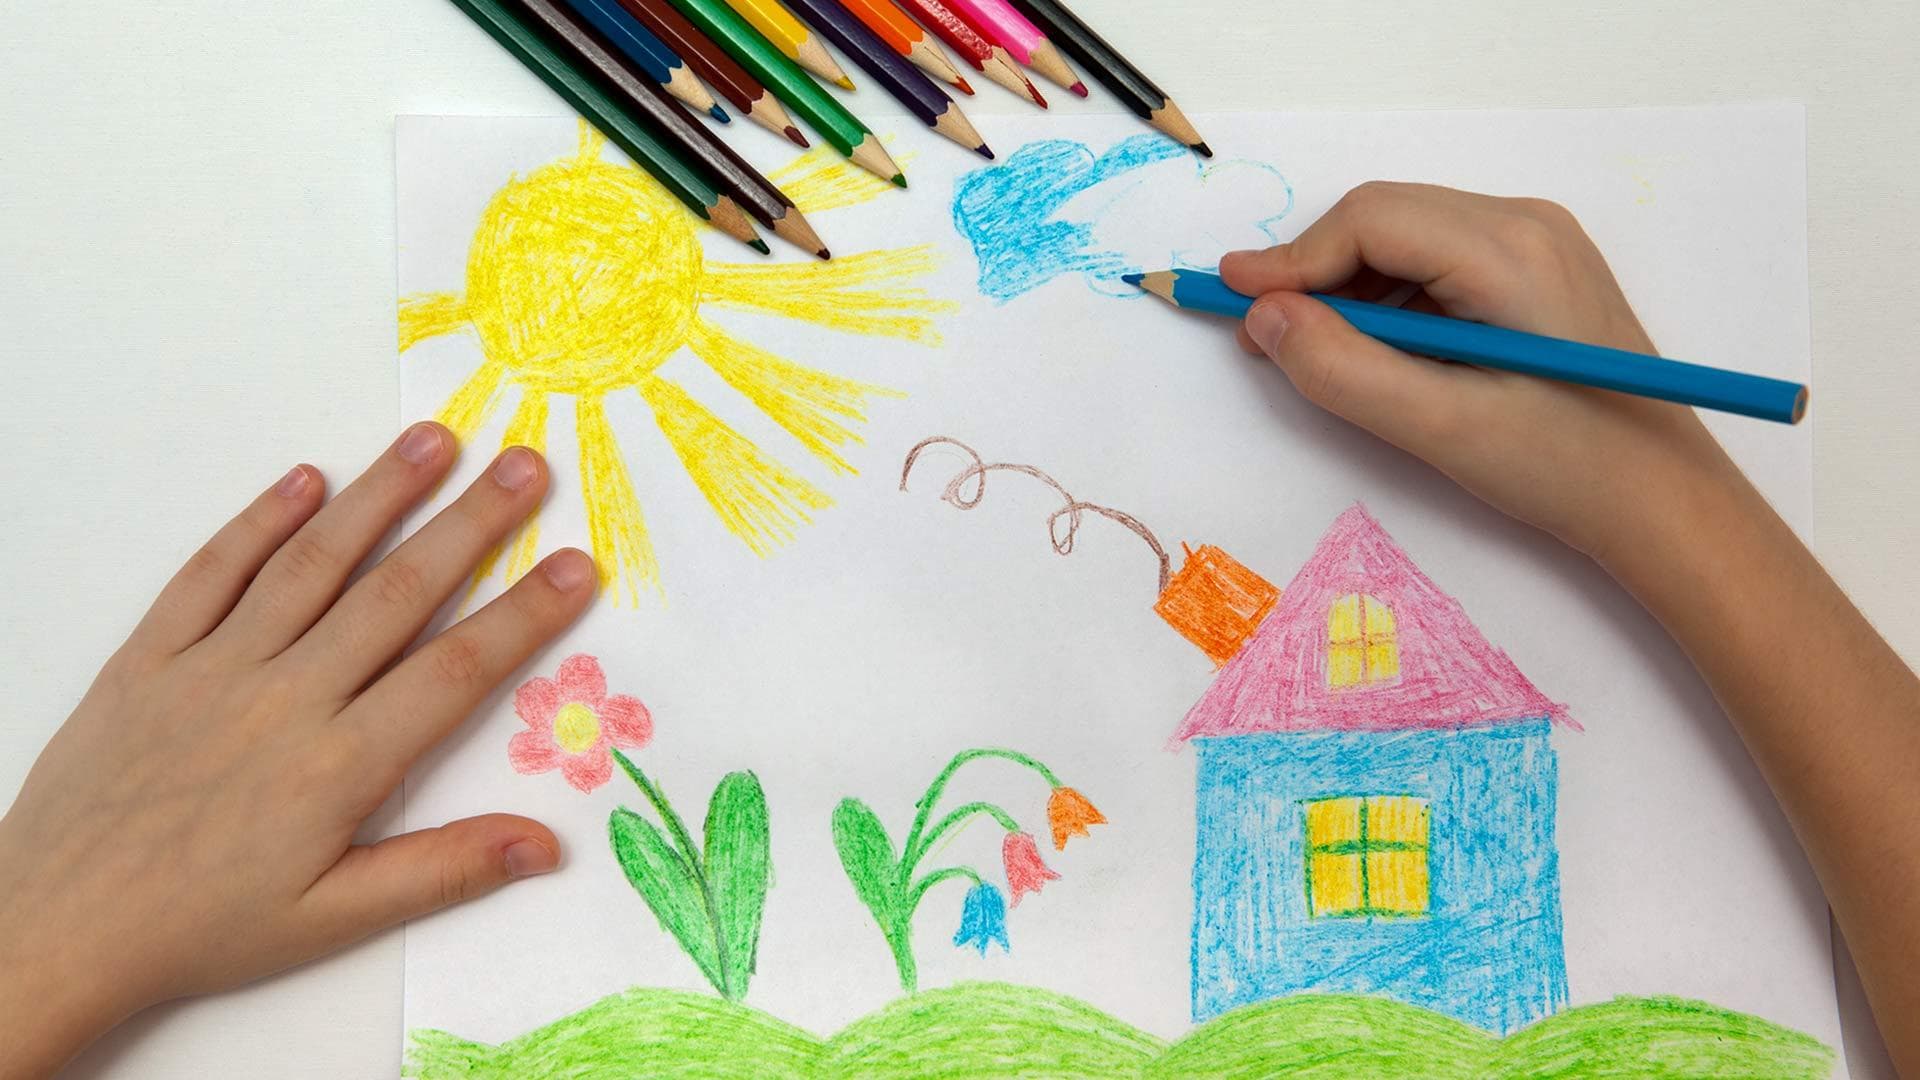 kid's hands drawing a house with colored pencils